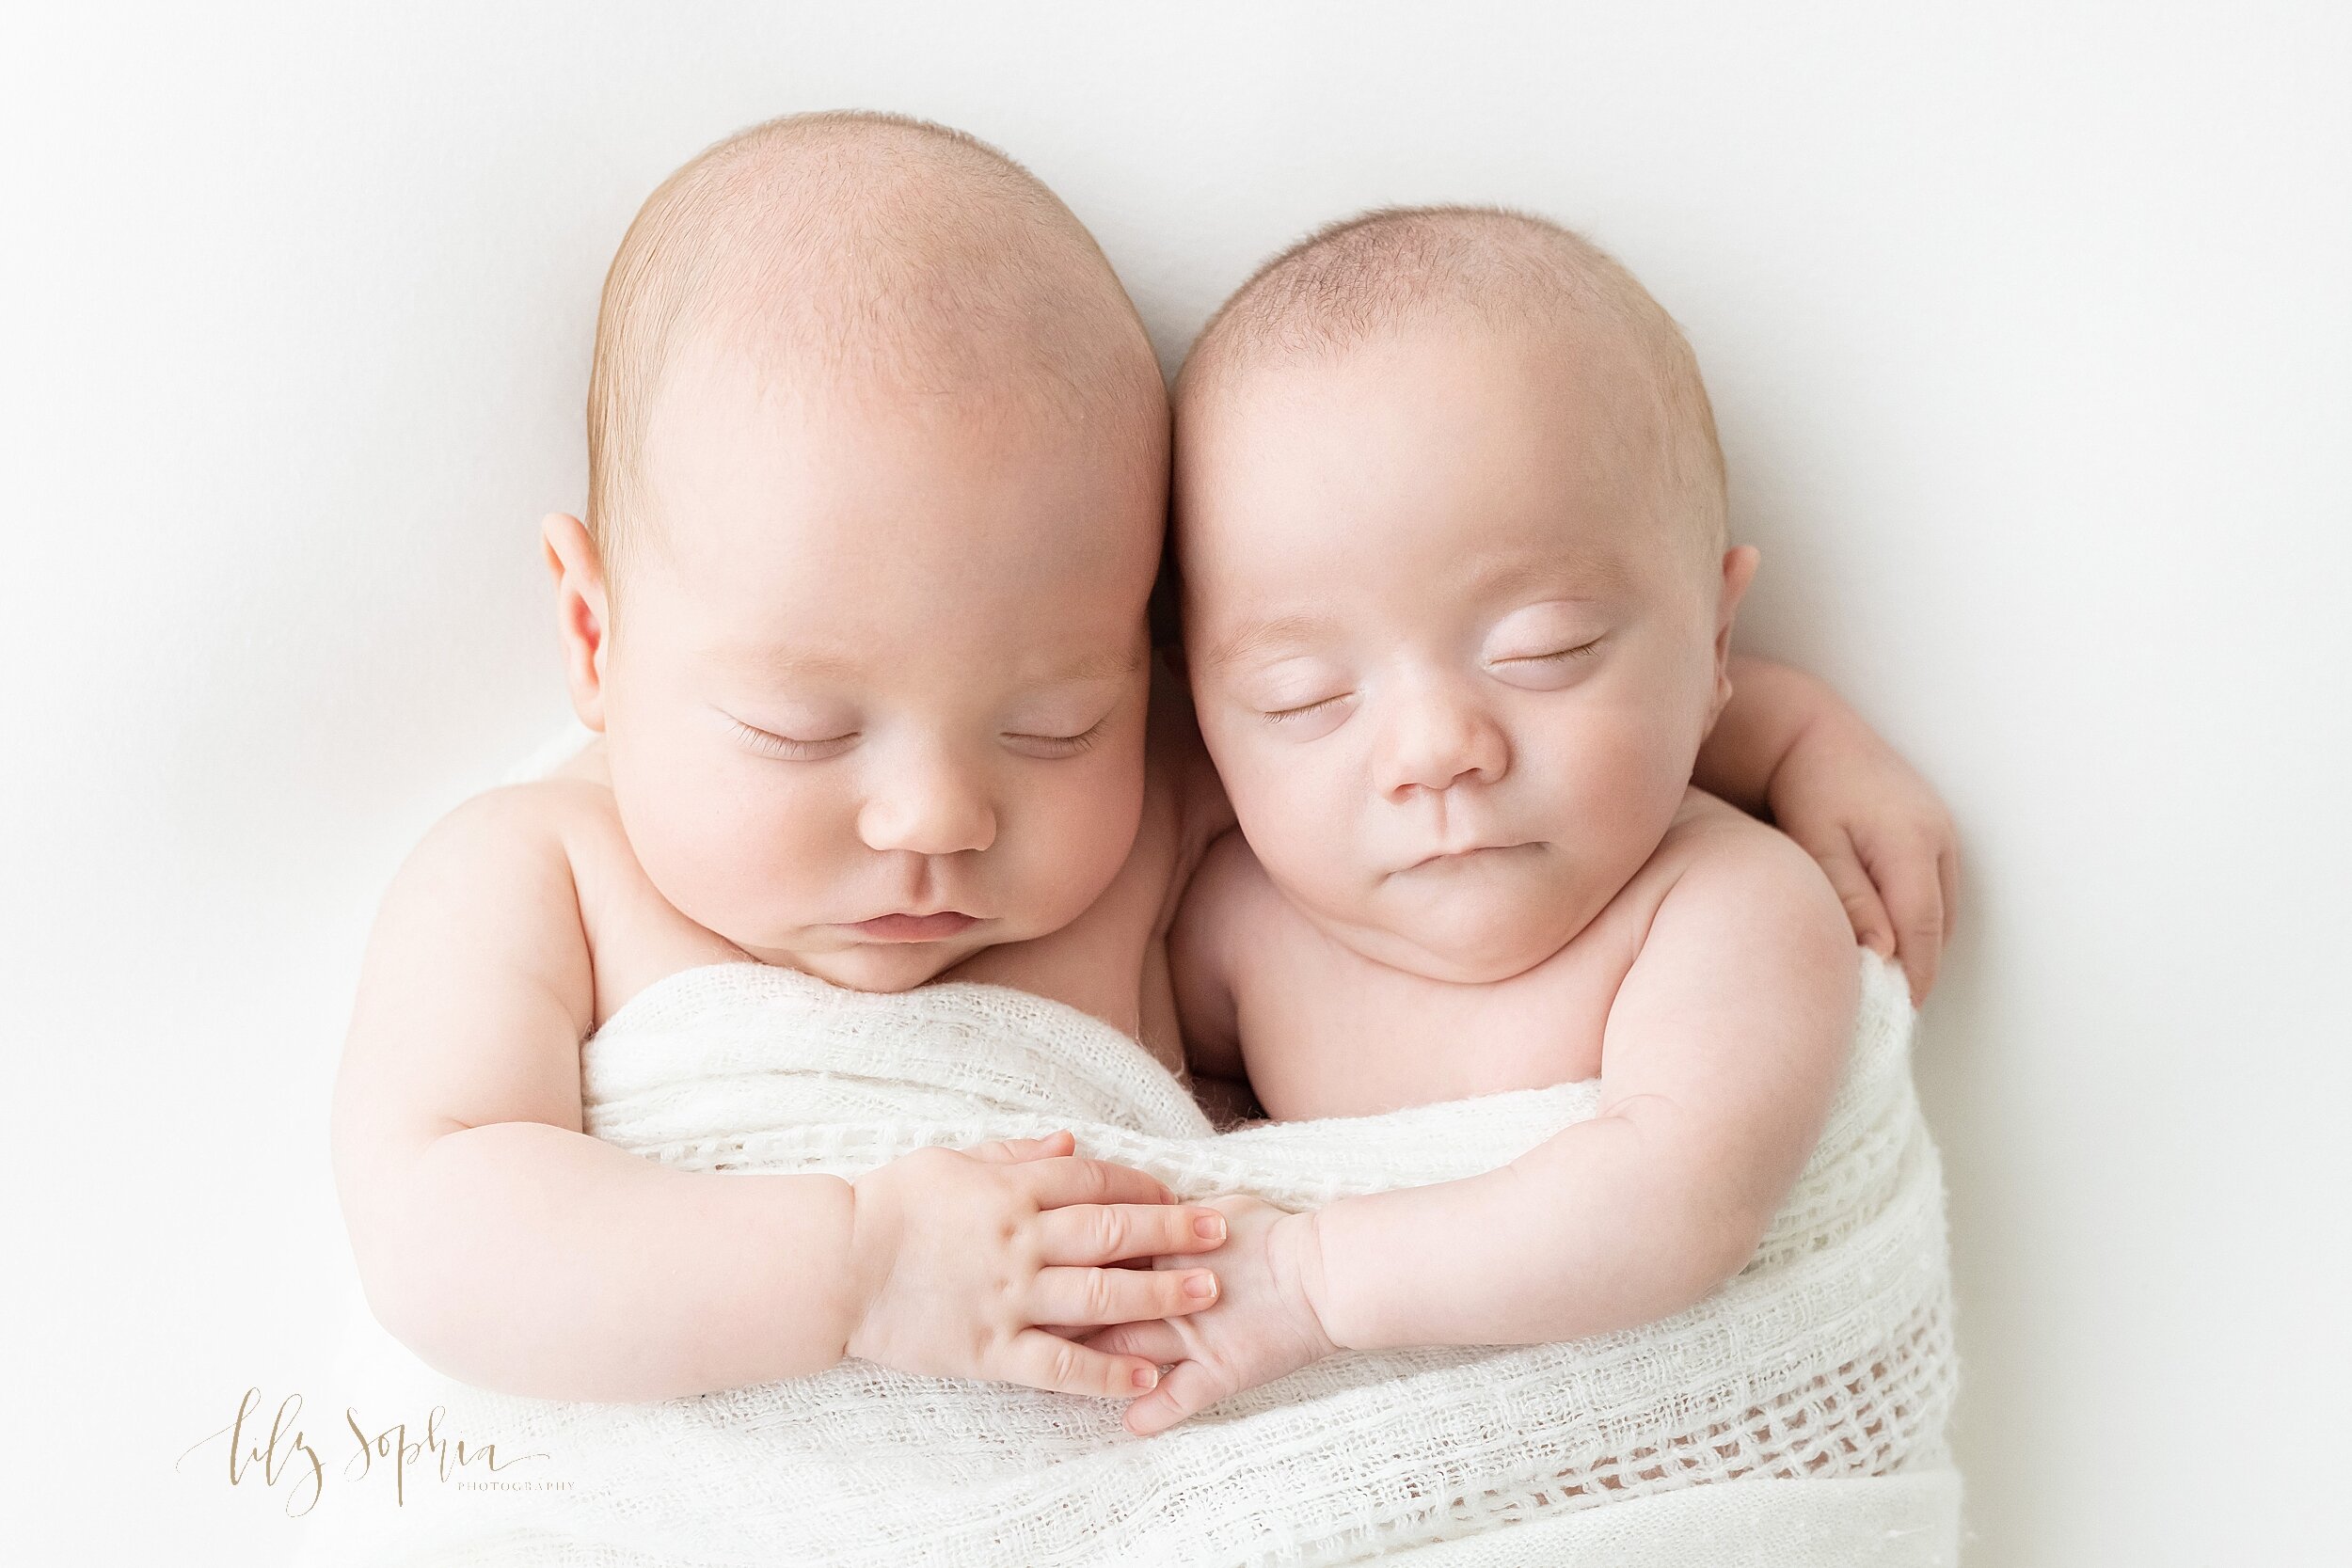  Newborn photograph of twin boys with their arms around each other and their other hands on top of one another as they are swaddled together in one white knitted blanket as they sleep in a studio using natural light near Oakhurst in Atlanta, Georgia.